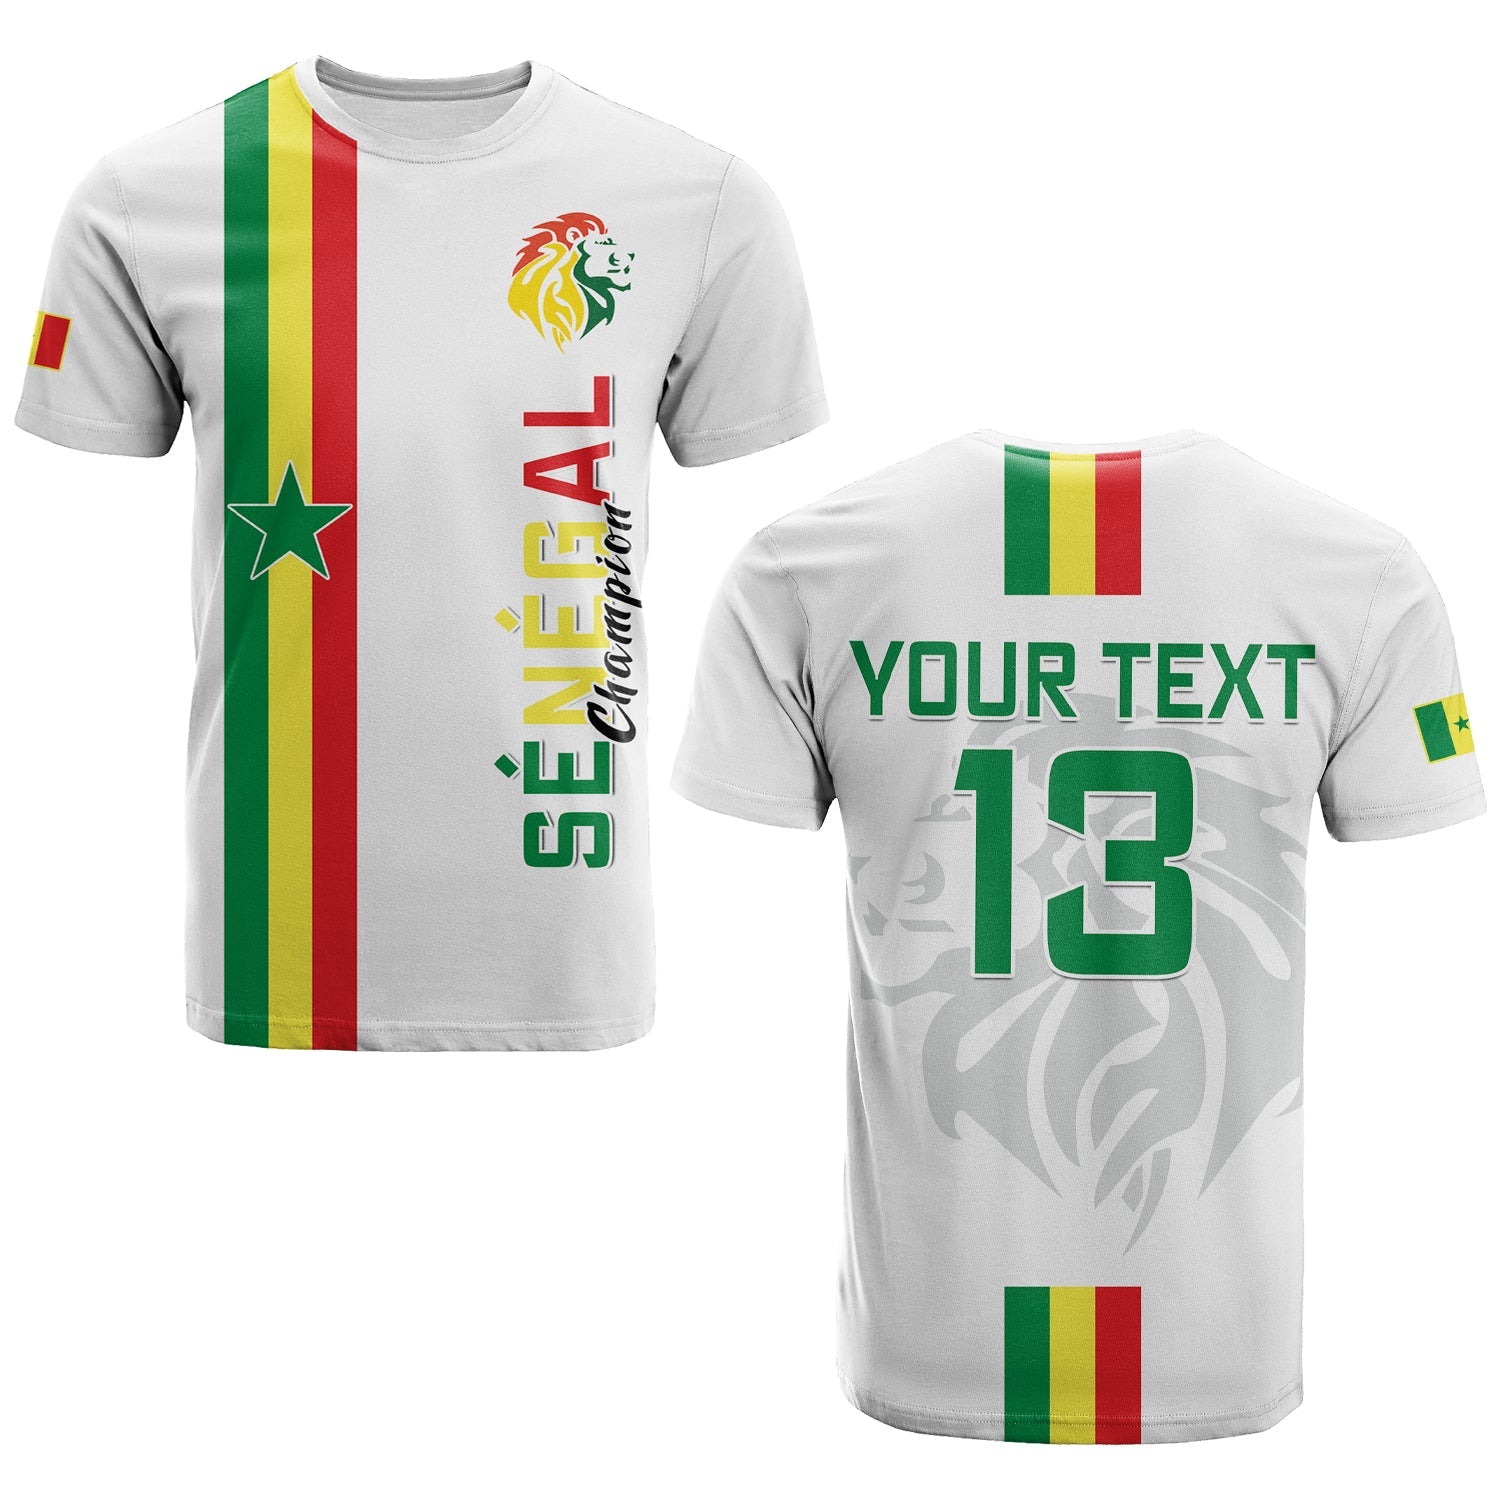 custom-text-and-number-senegal-football-t-shirt-world-cup-soccer-lions-of-teranga-champions-mix-map